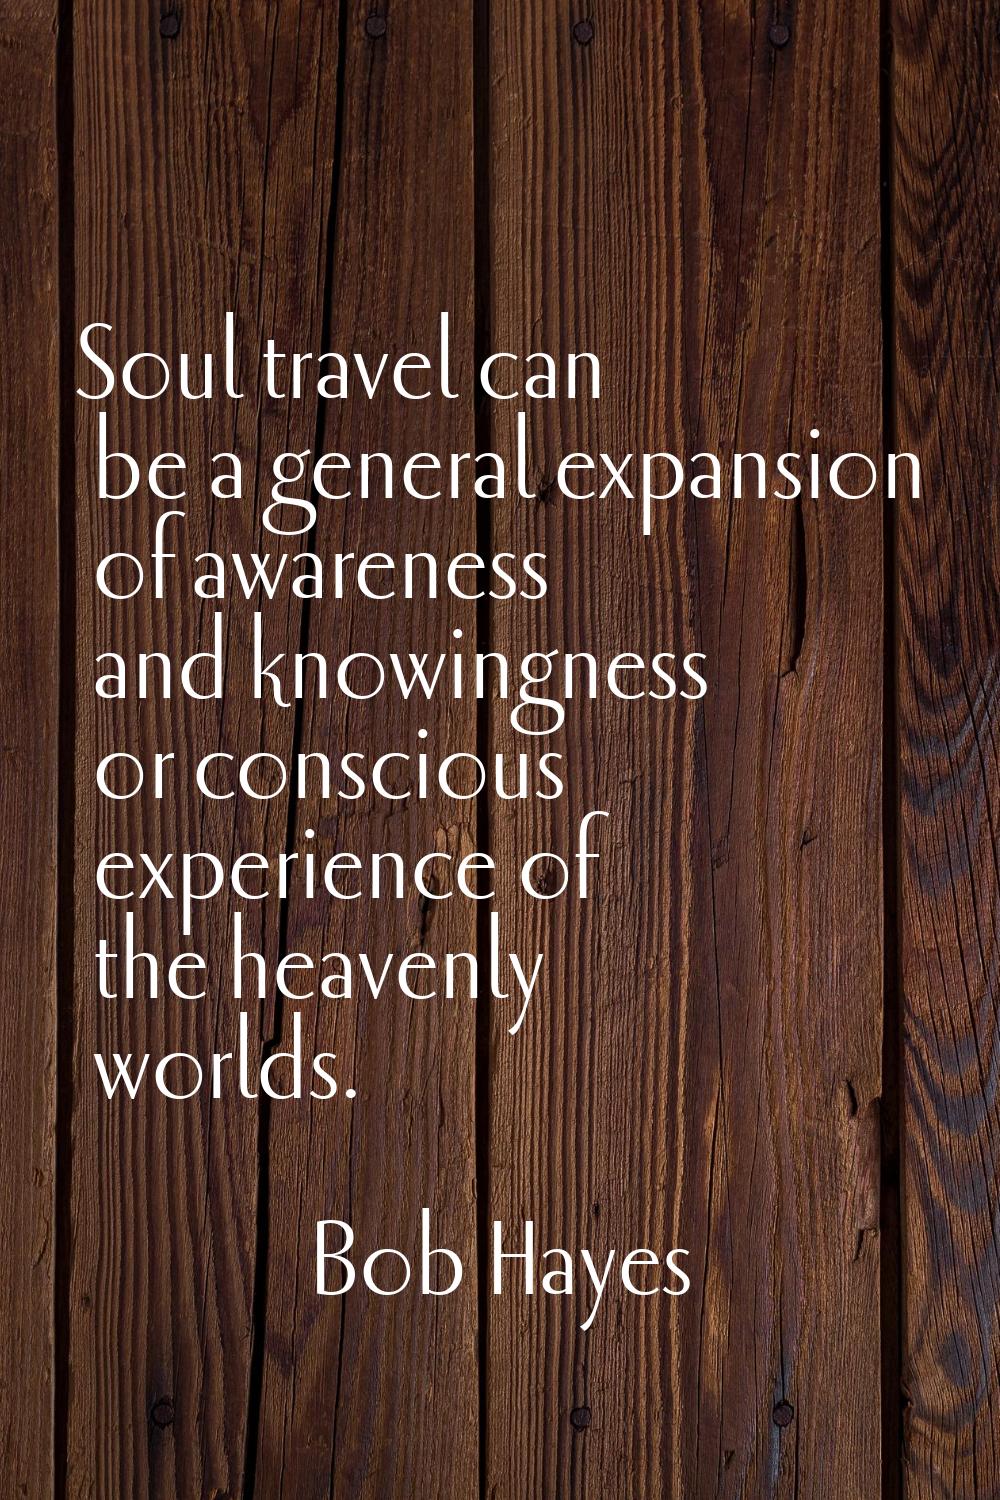 Soul travel can be a general expansion of awareness and knowingness or conscious experience of the 